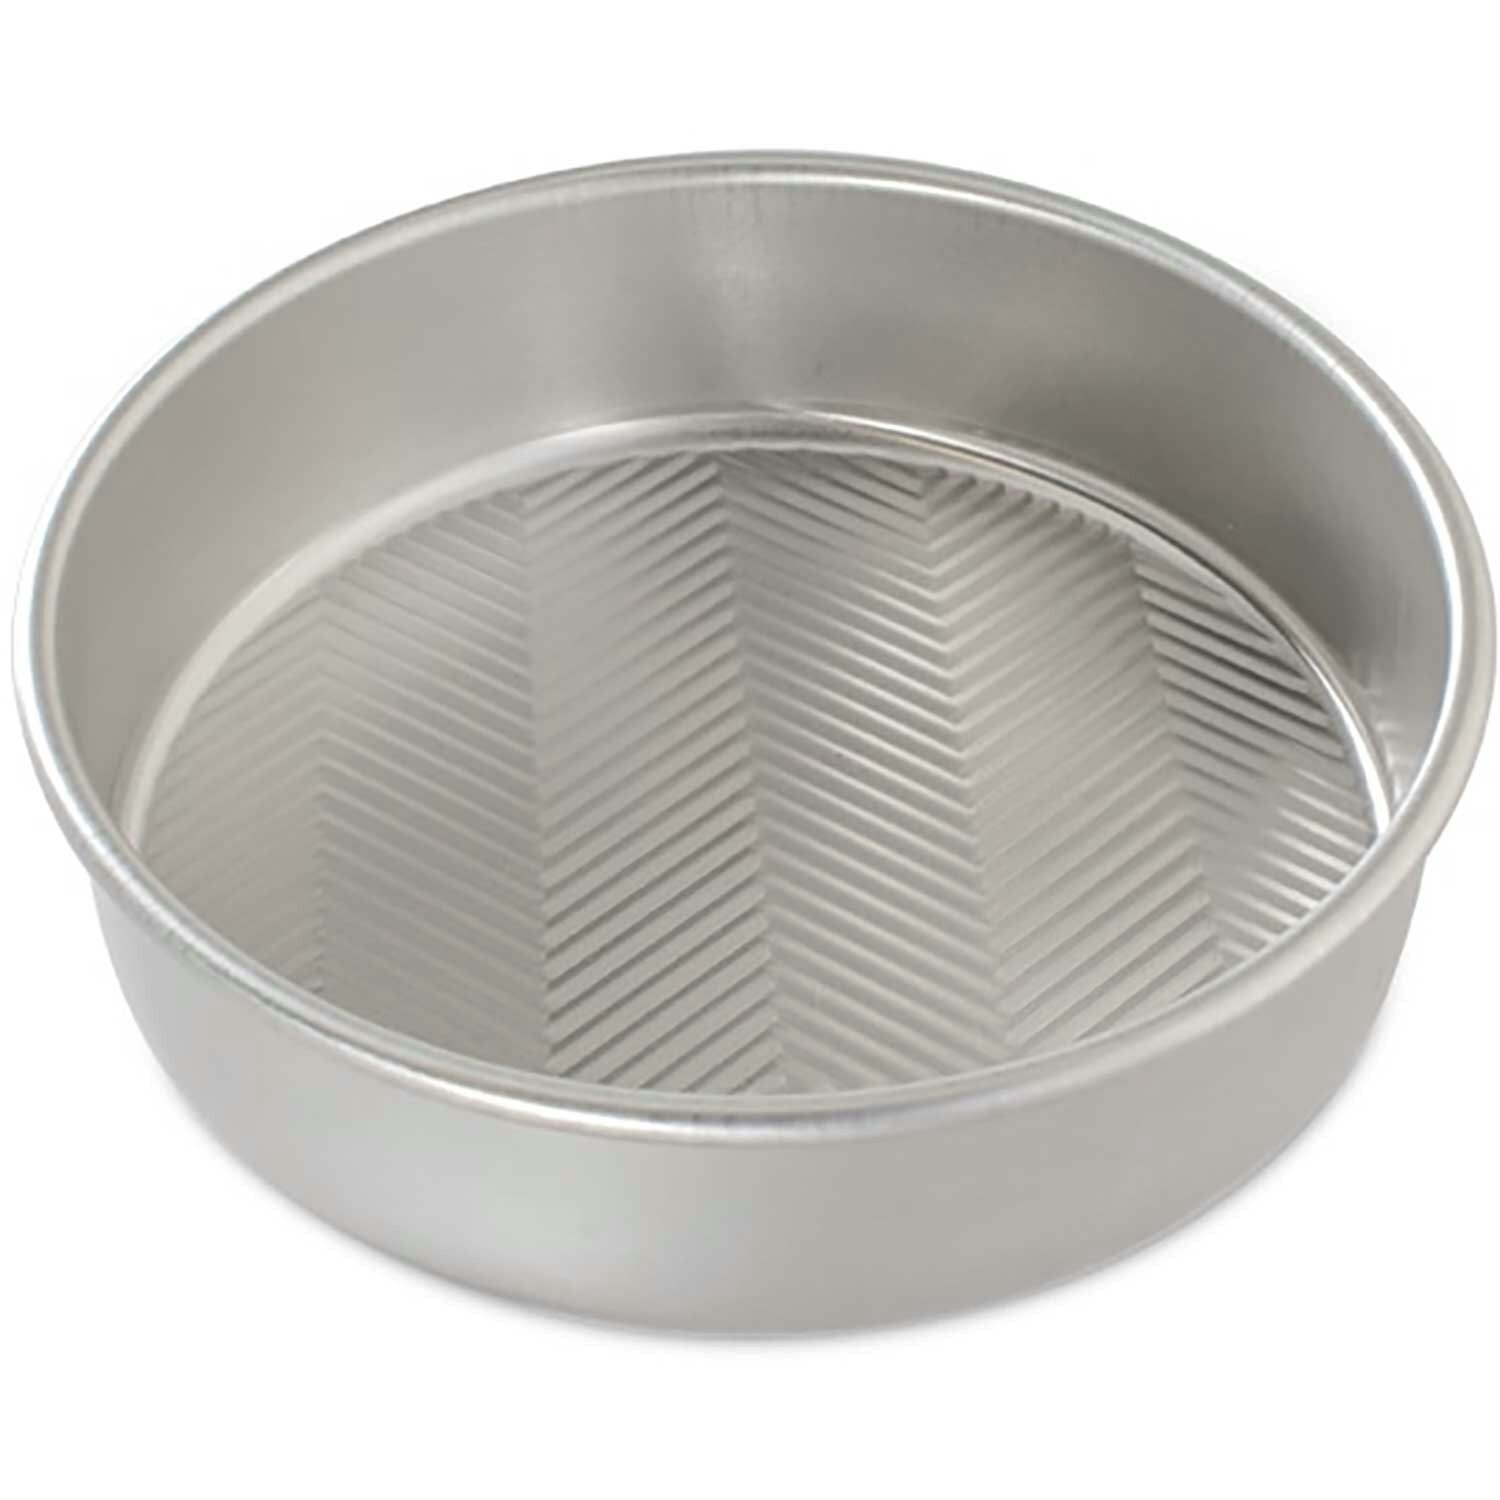 This Top-Rated 9-Inch Cake Pan Is on Sale for Just $21